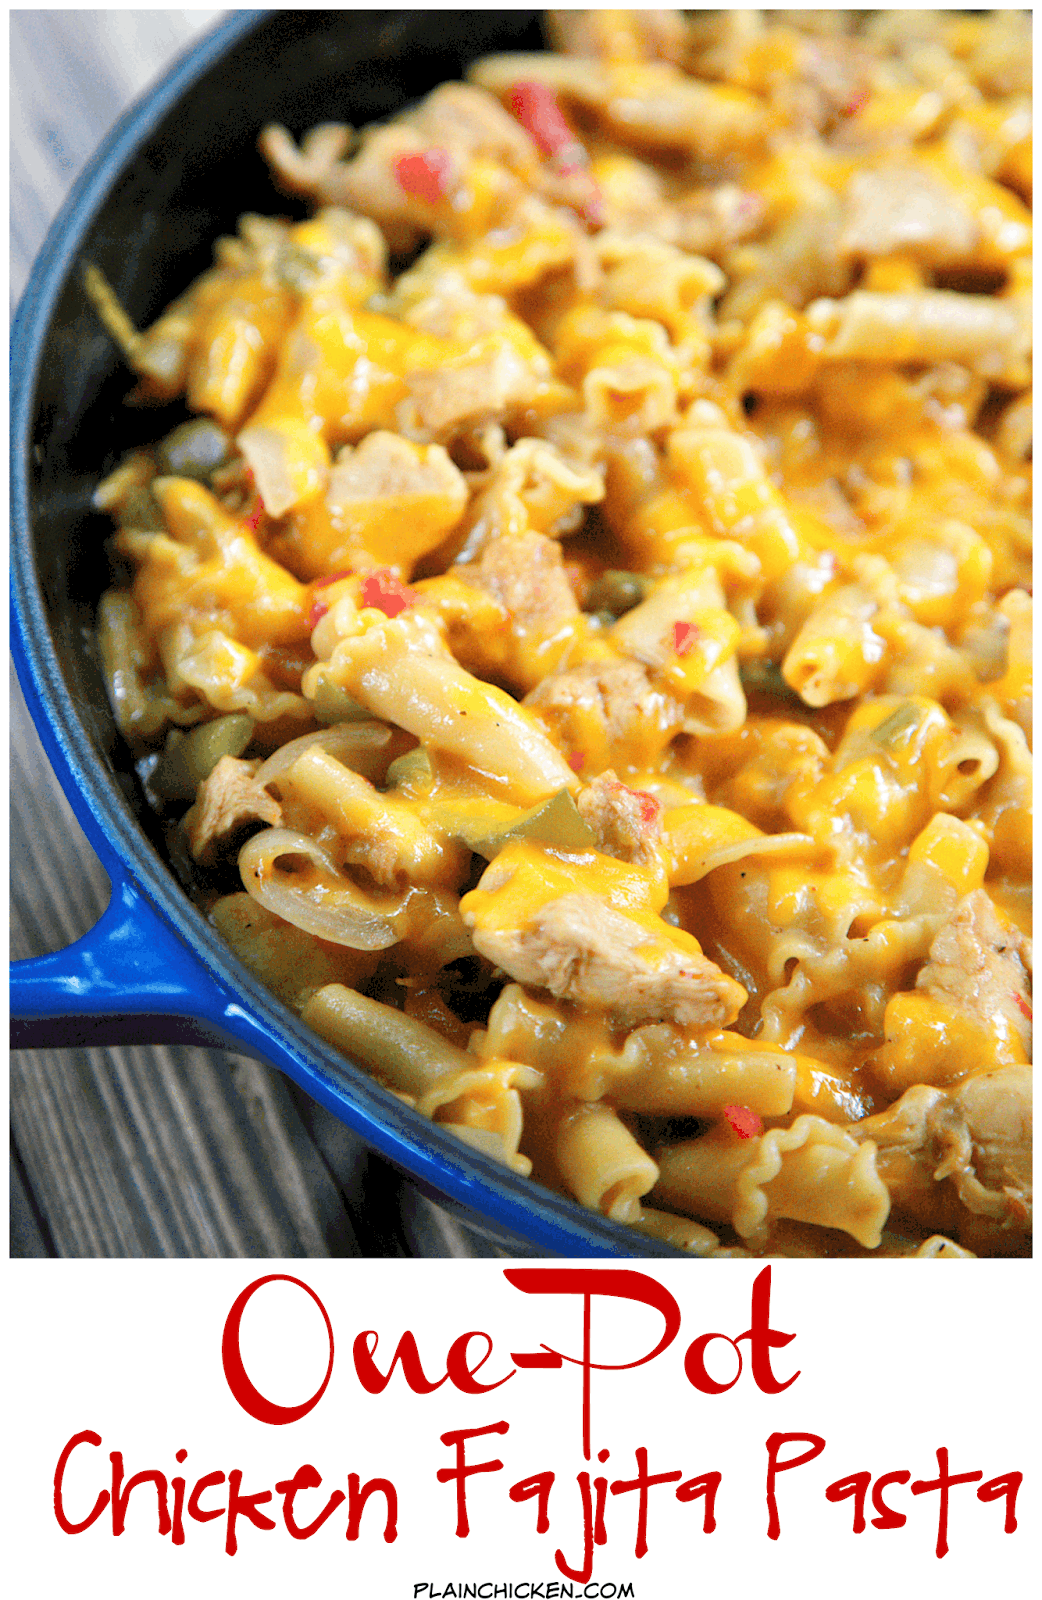 One-Pot Chicken Fajita Pasta Recipe - everything cooks in the same pan, even the pasta! Ready in under 20 minutes!! Chicken, onions, peppers, Rotel, fajita seasoning, chicken broth, cream, pasta, sour cream and cheese. Everyone gobbled this up! Quick, easy and delicious Mexican meal!